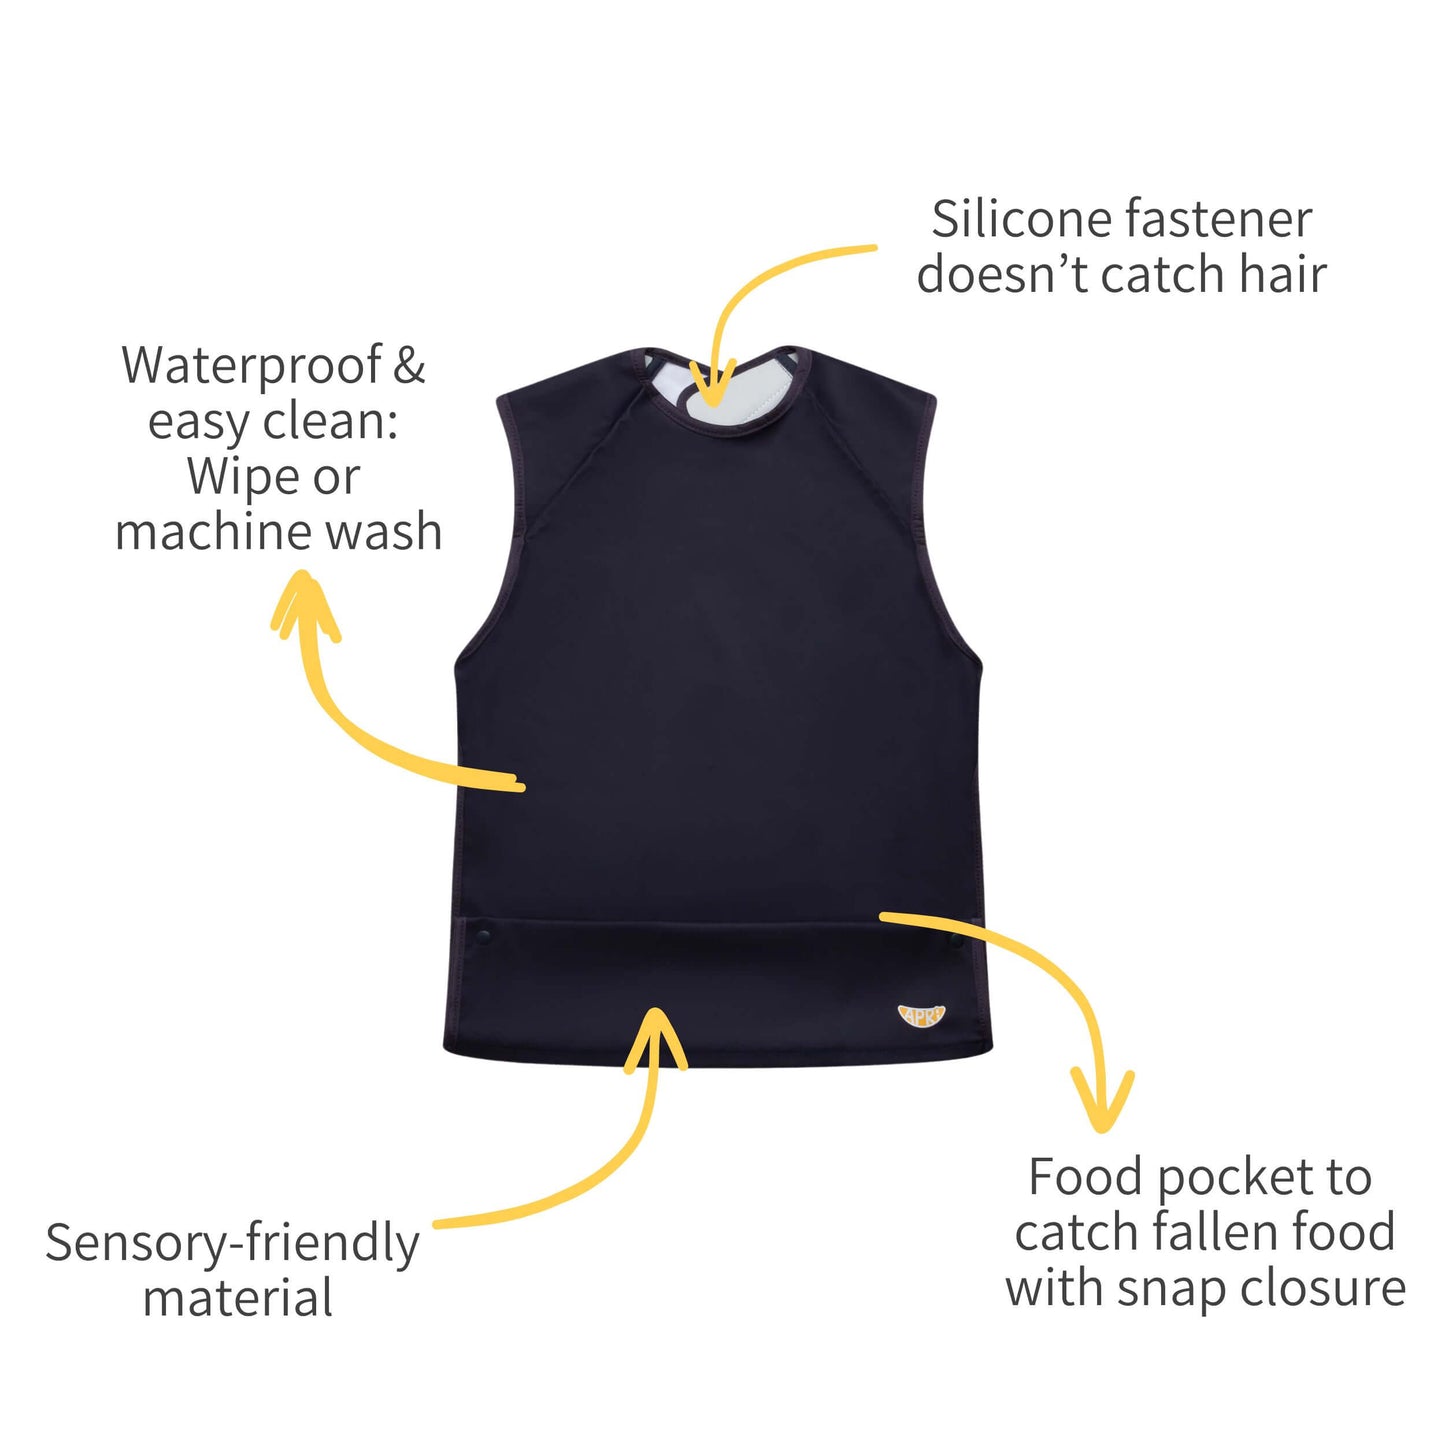 Apri sensory-friendly waterproof bib designed for kids, teens, and adults with disabilities